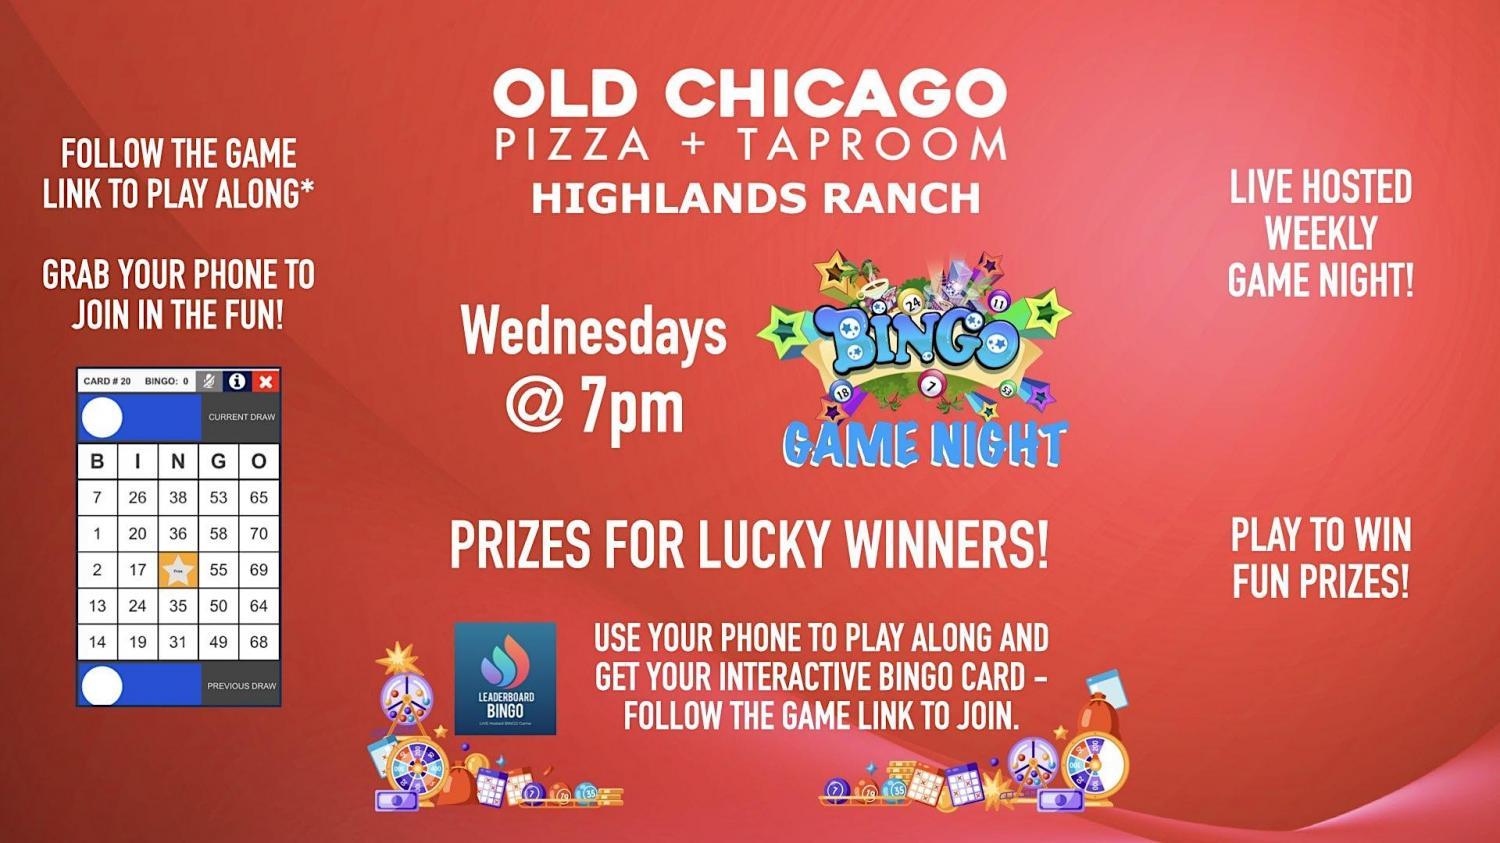 BINGO Game Night | Old Chicago - Highlands Ranch CO
Wed Oct 5, 7:00 PM - Wed Oct 5, 9:00 PM